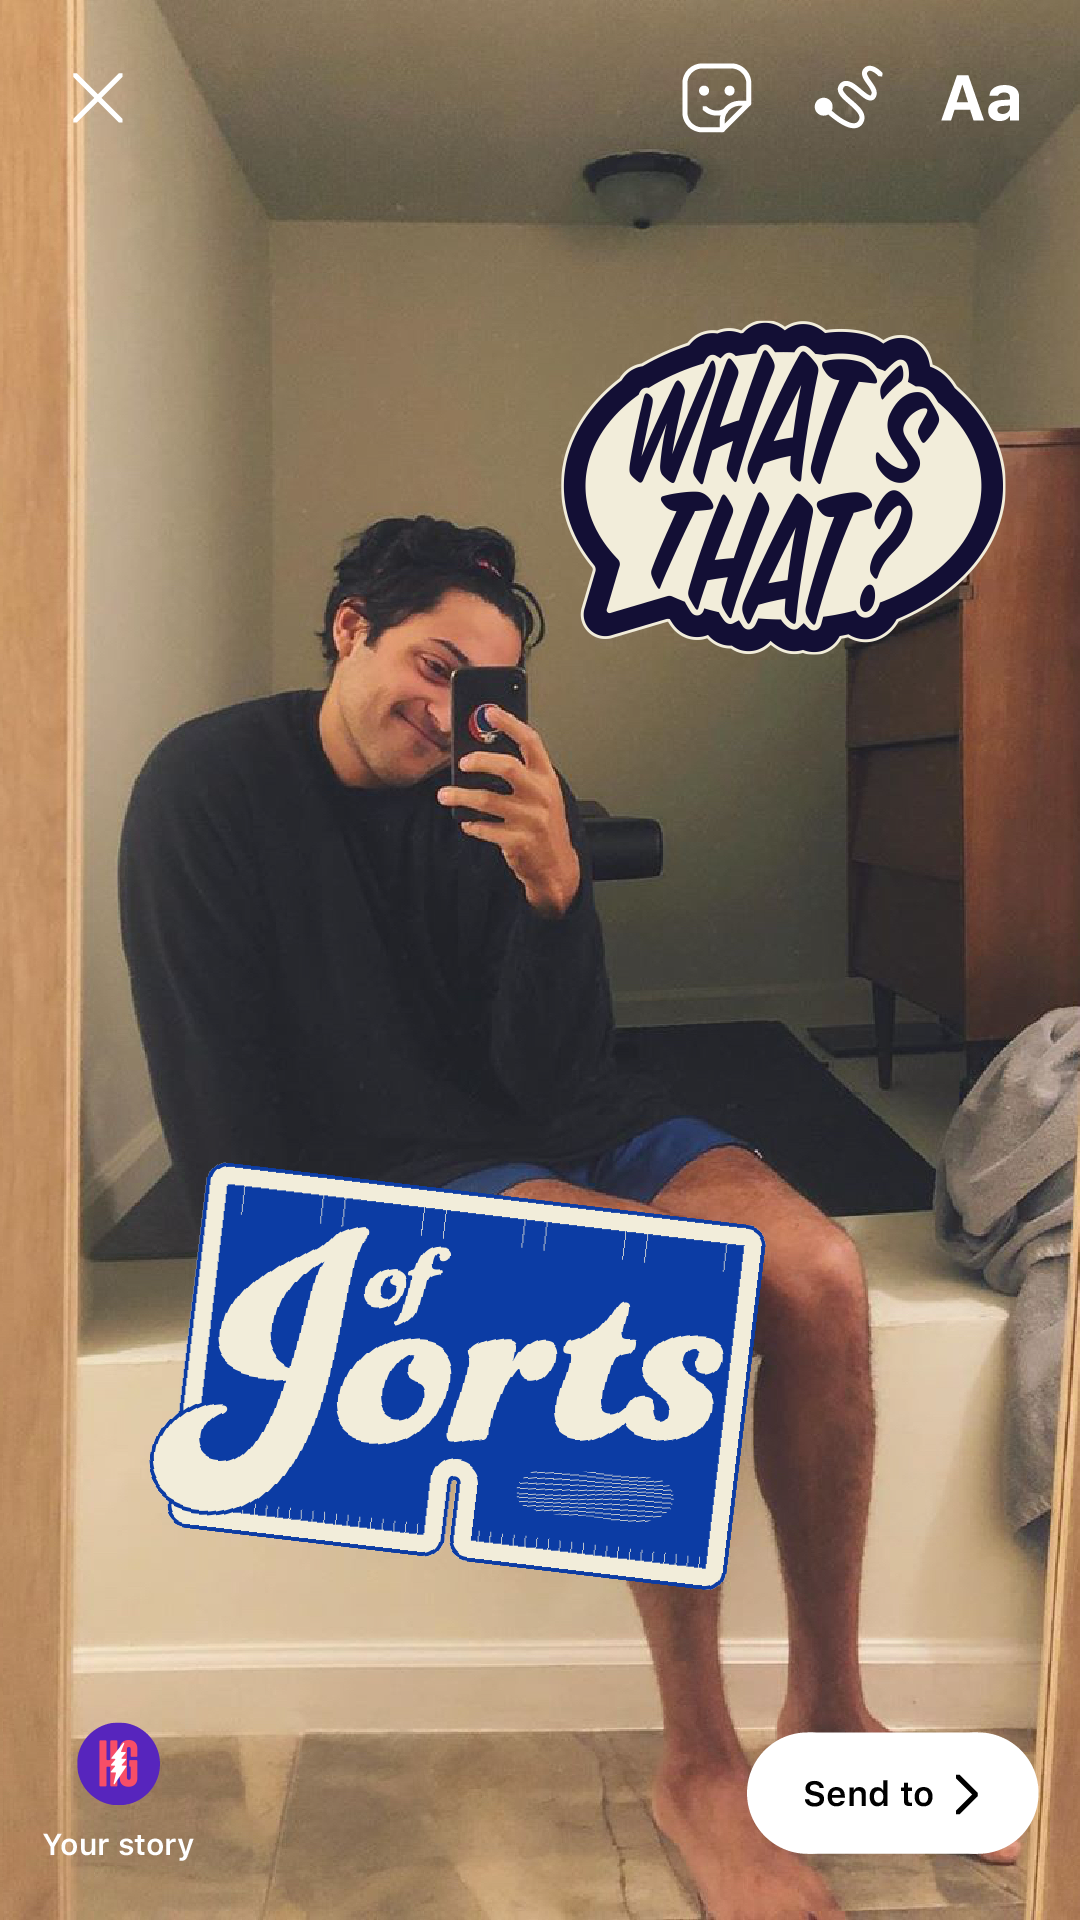 Story_What's That Jorts.png